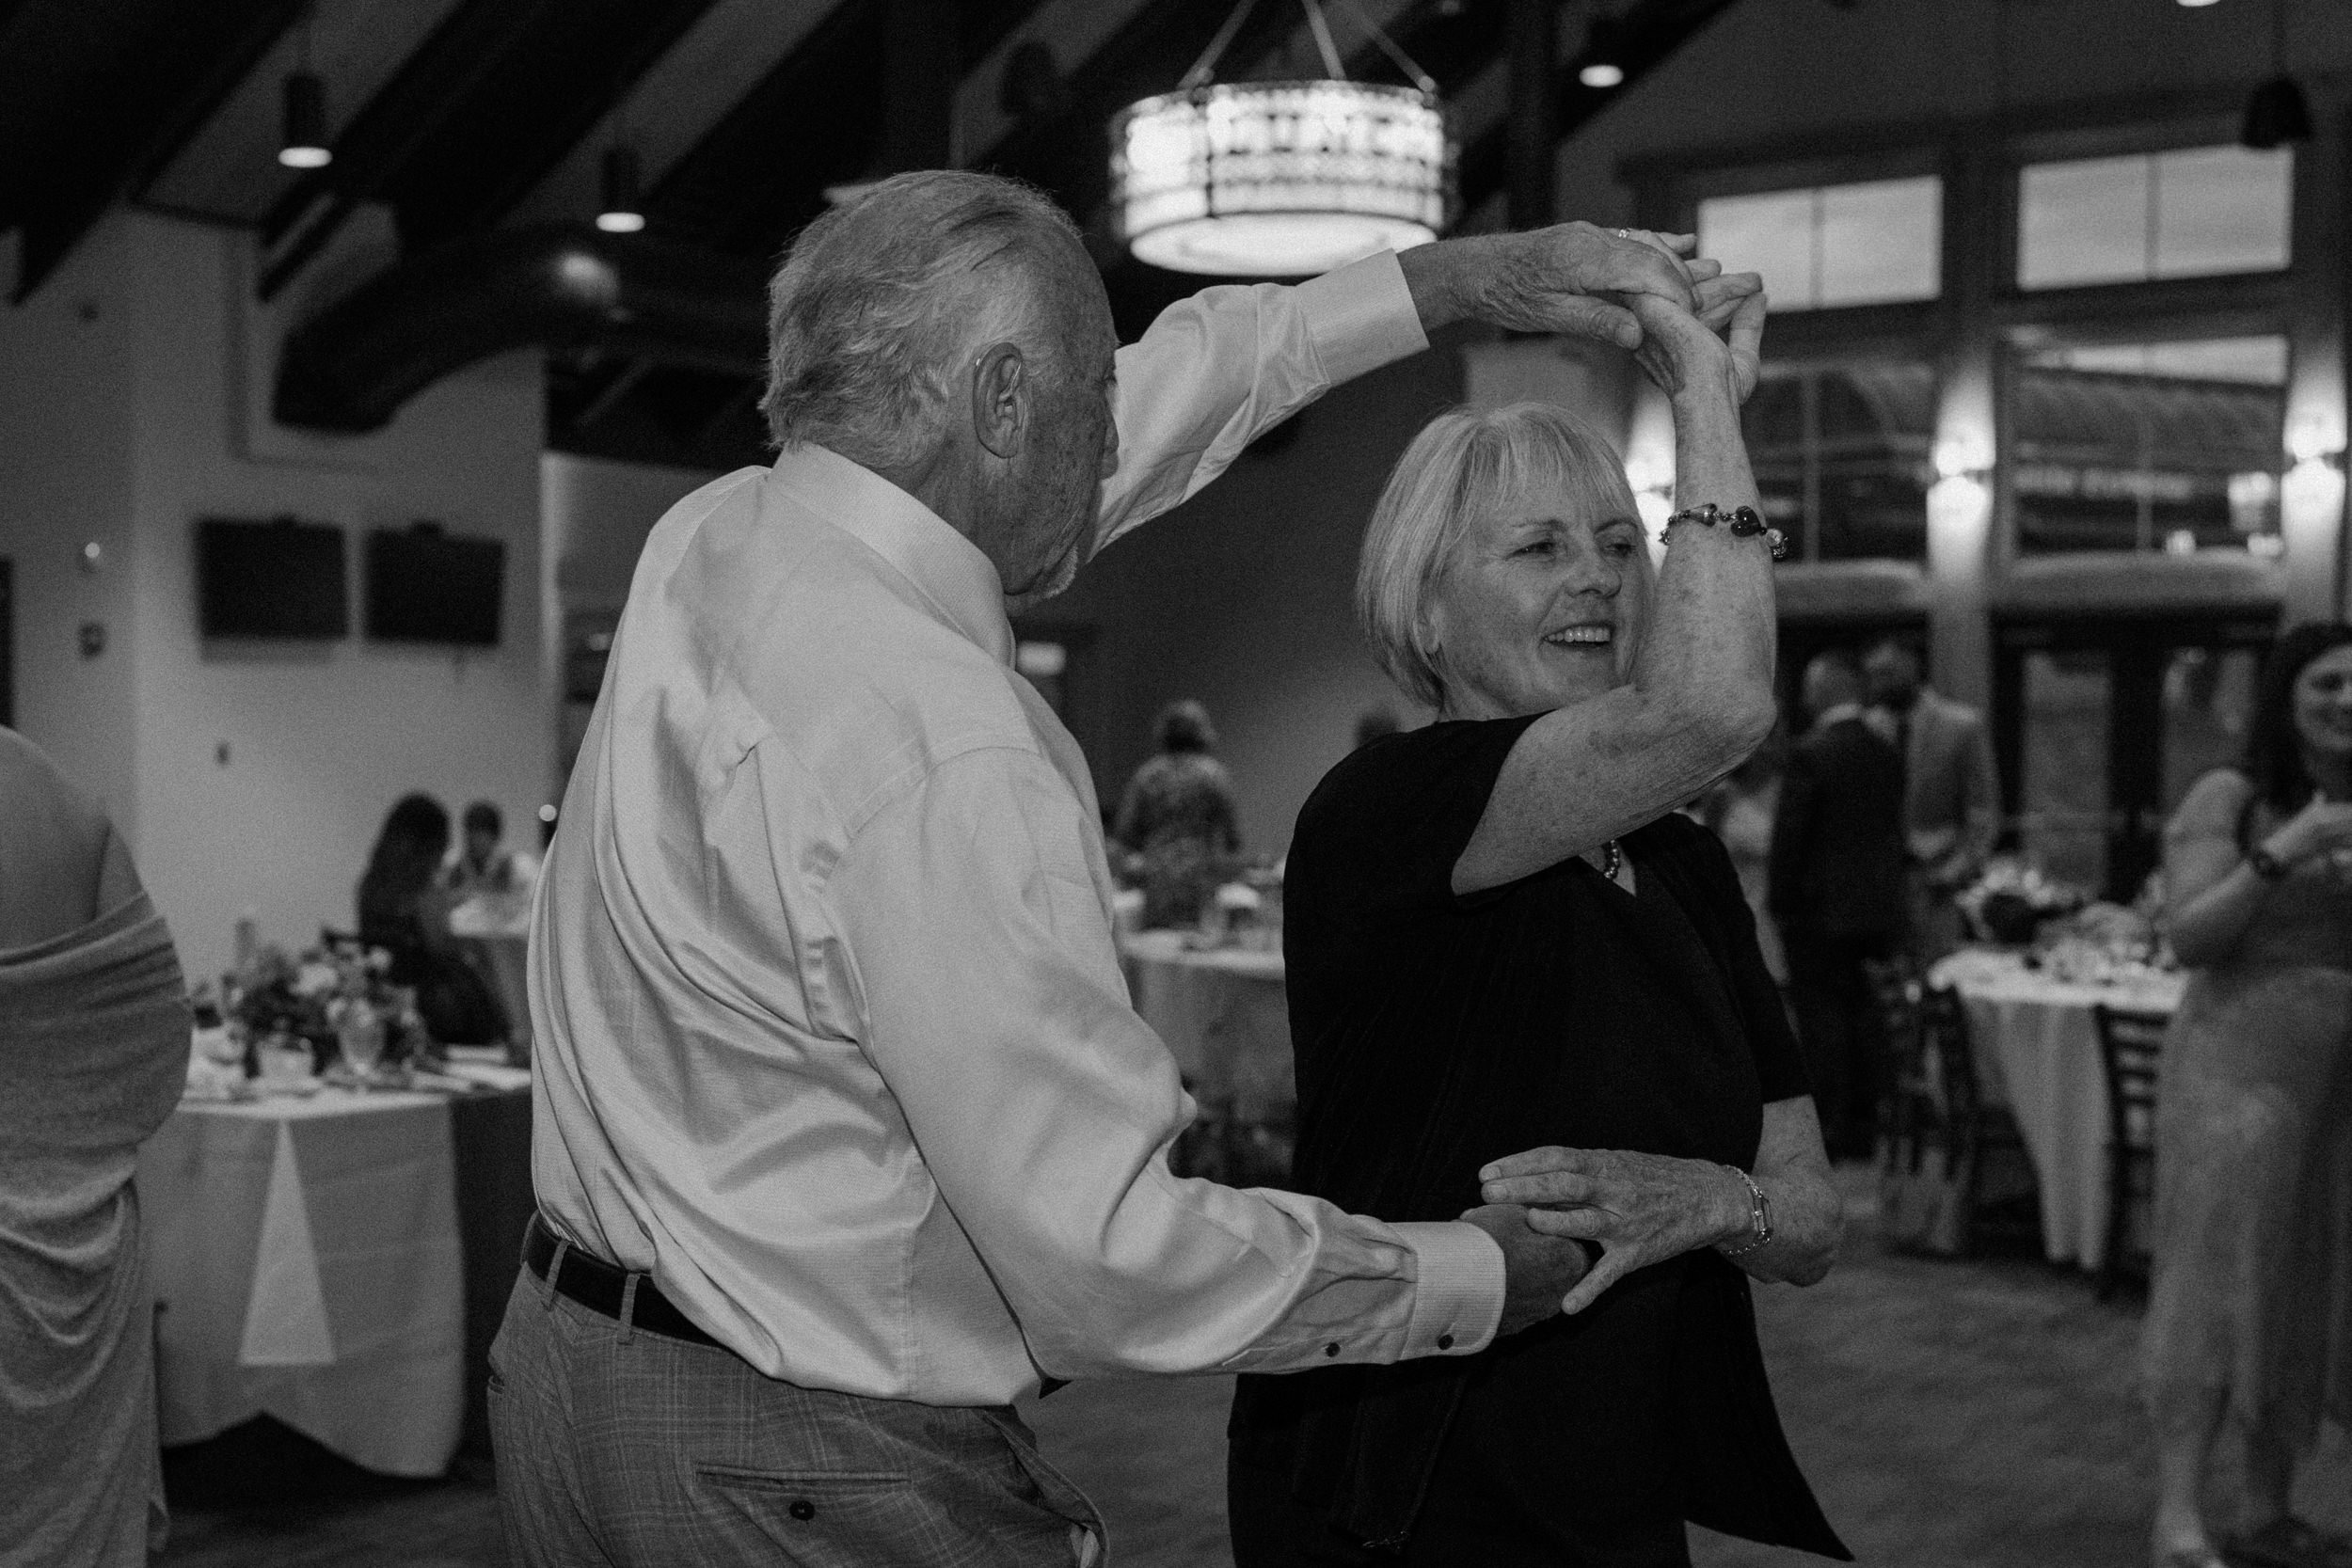 A man twirls a woman around during the reception dance